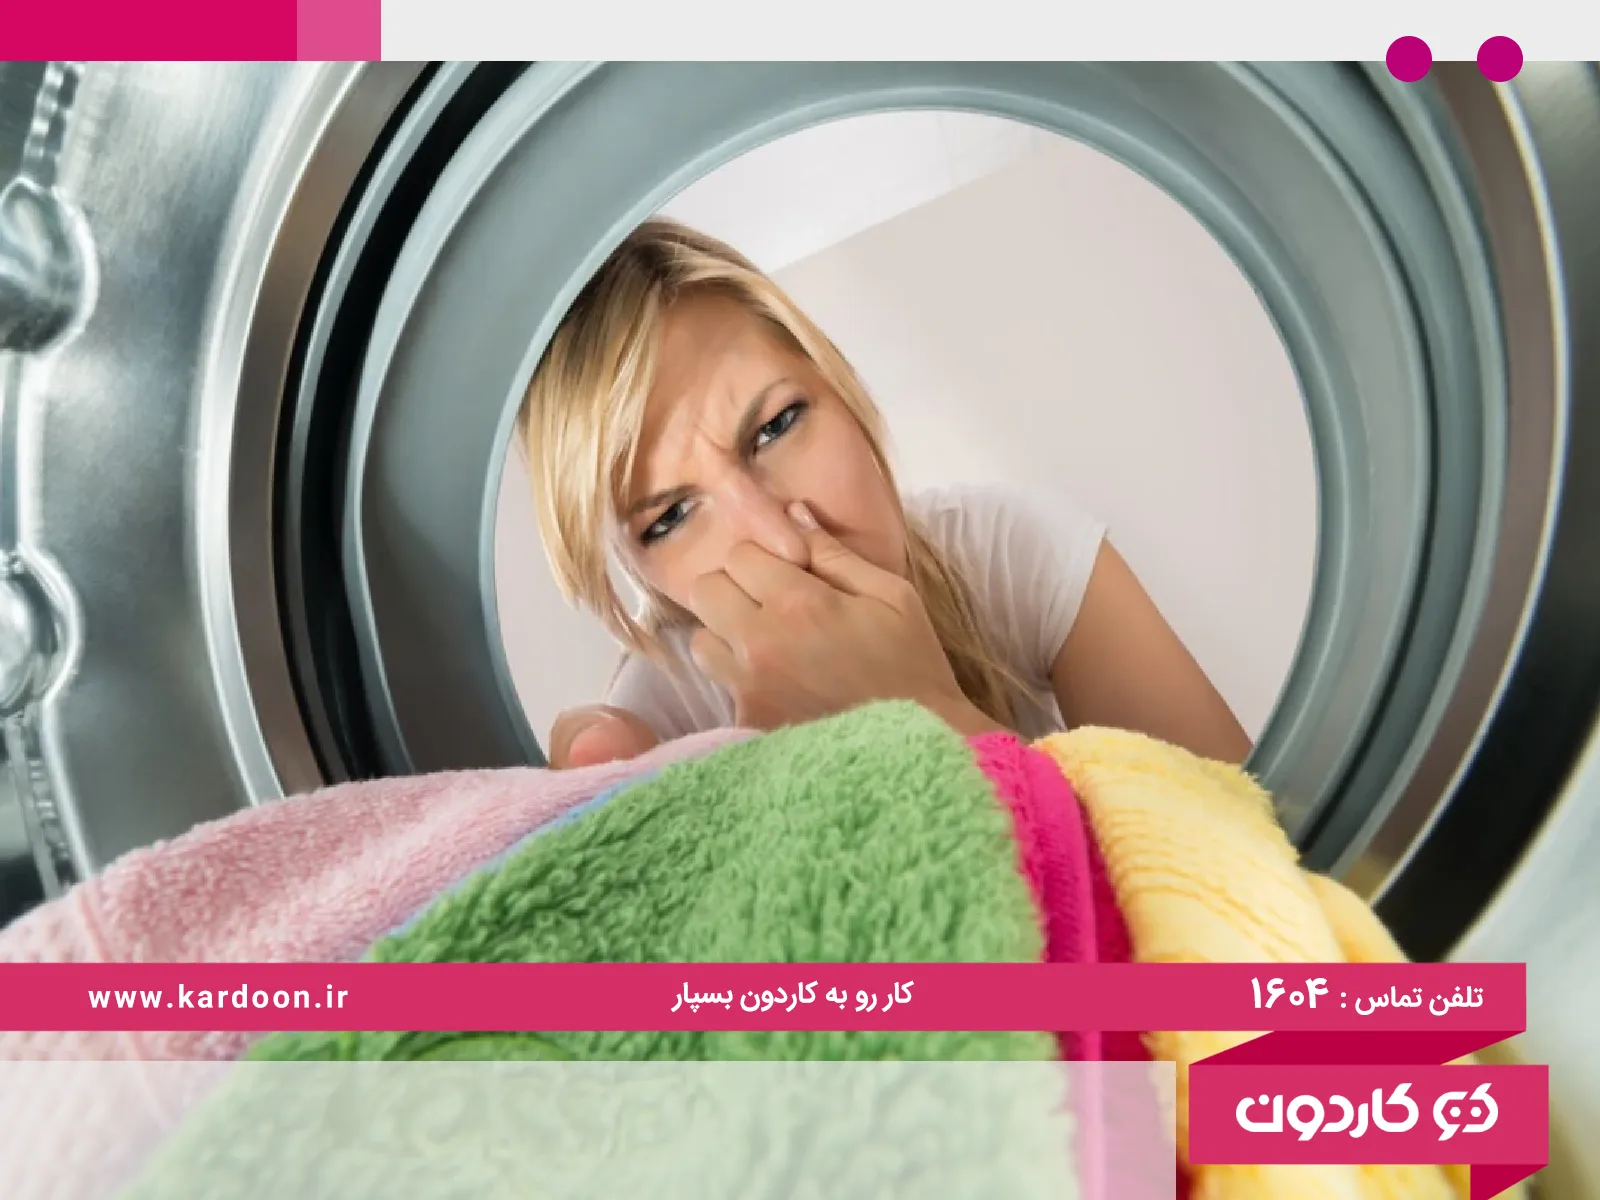 What is the cause of the bad smell of the washing machine